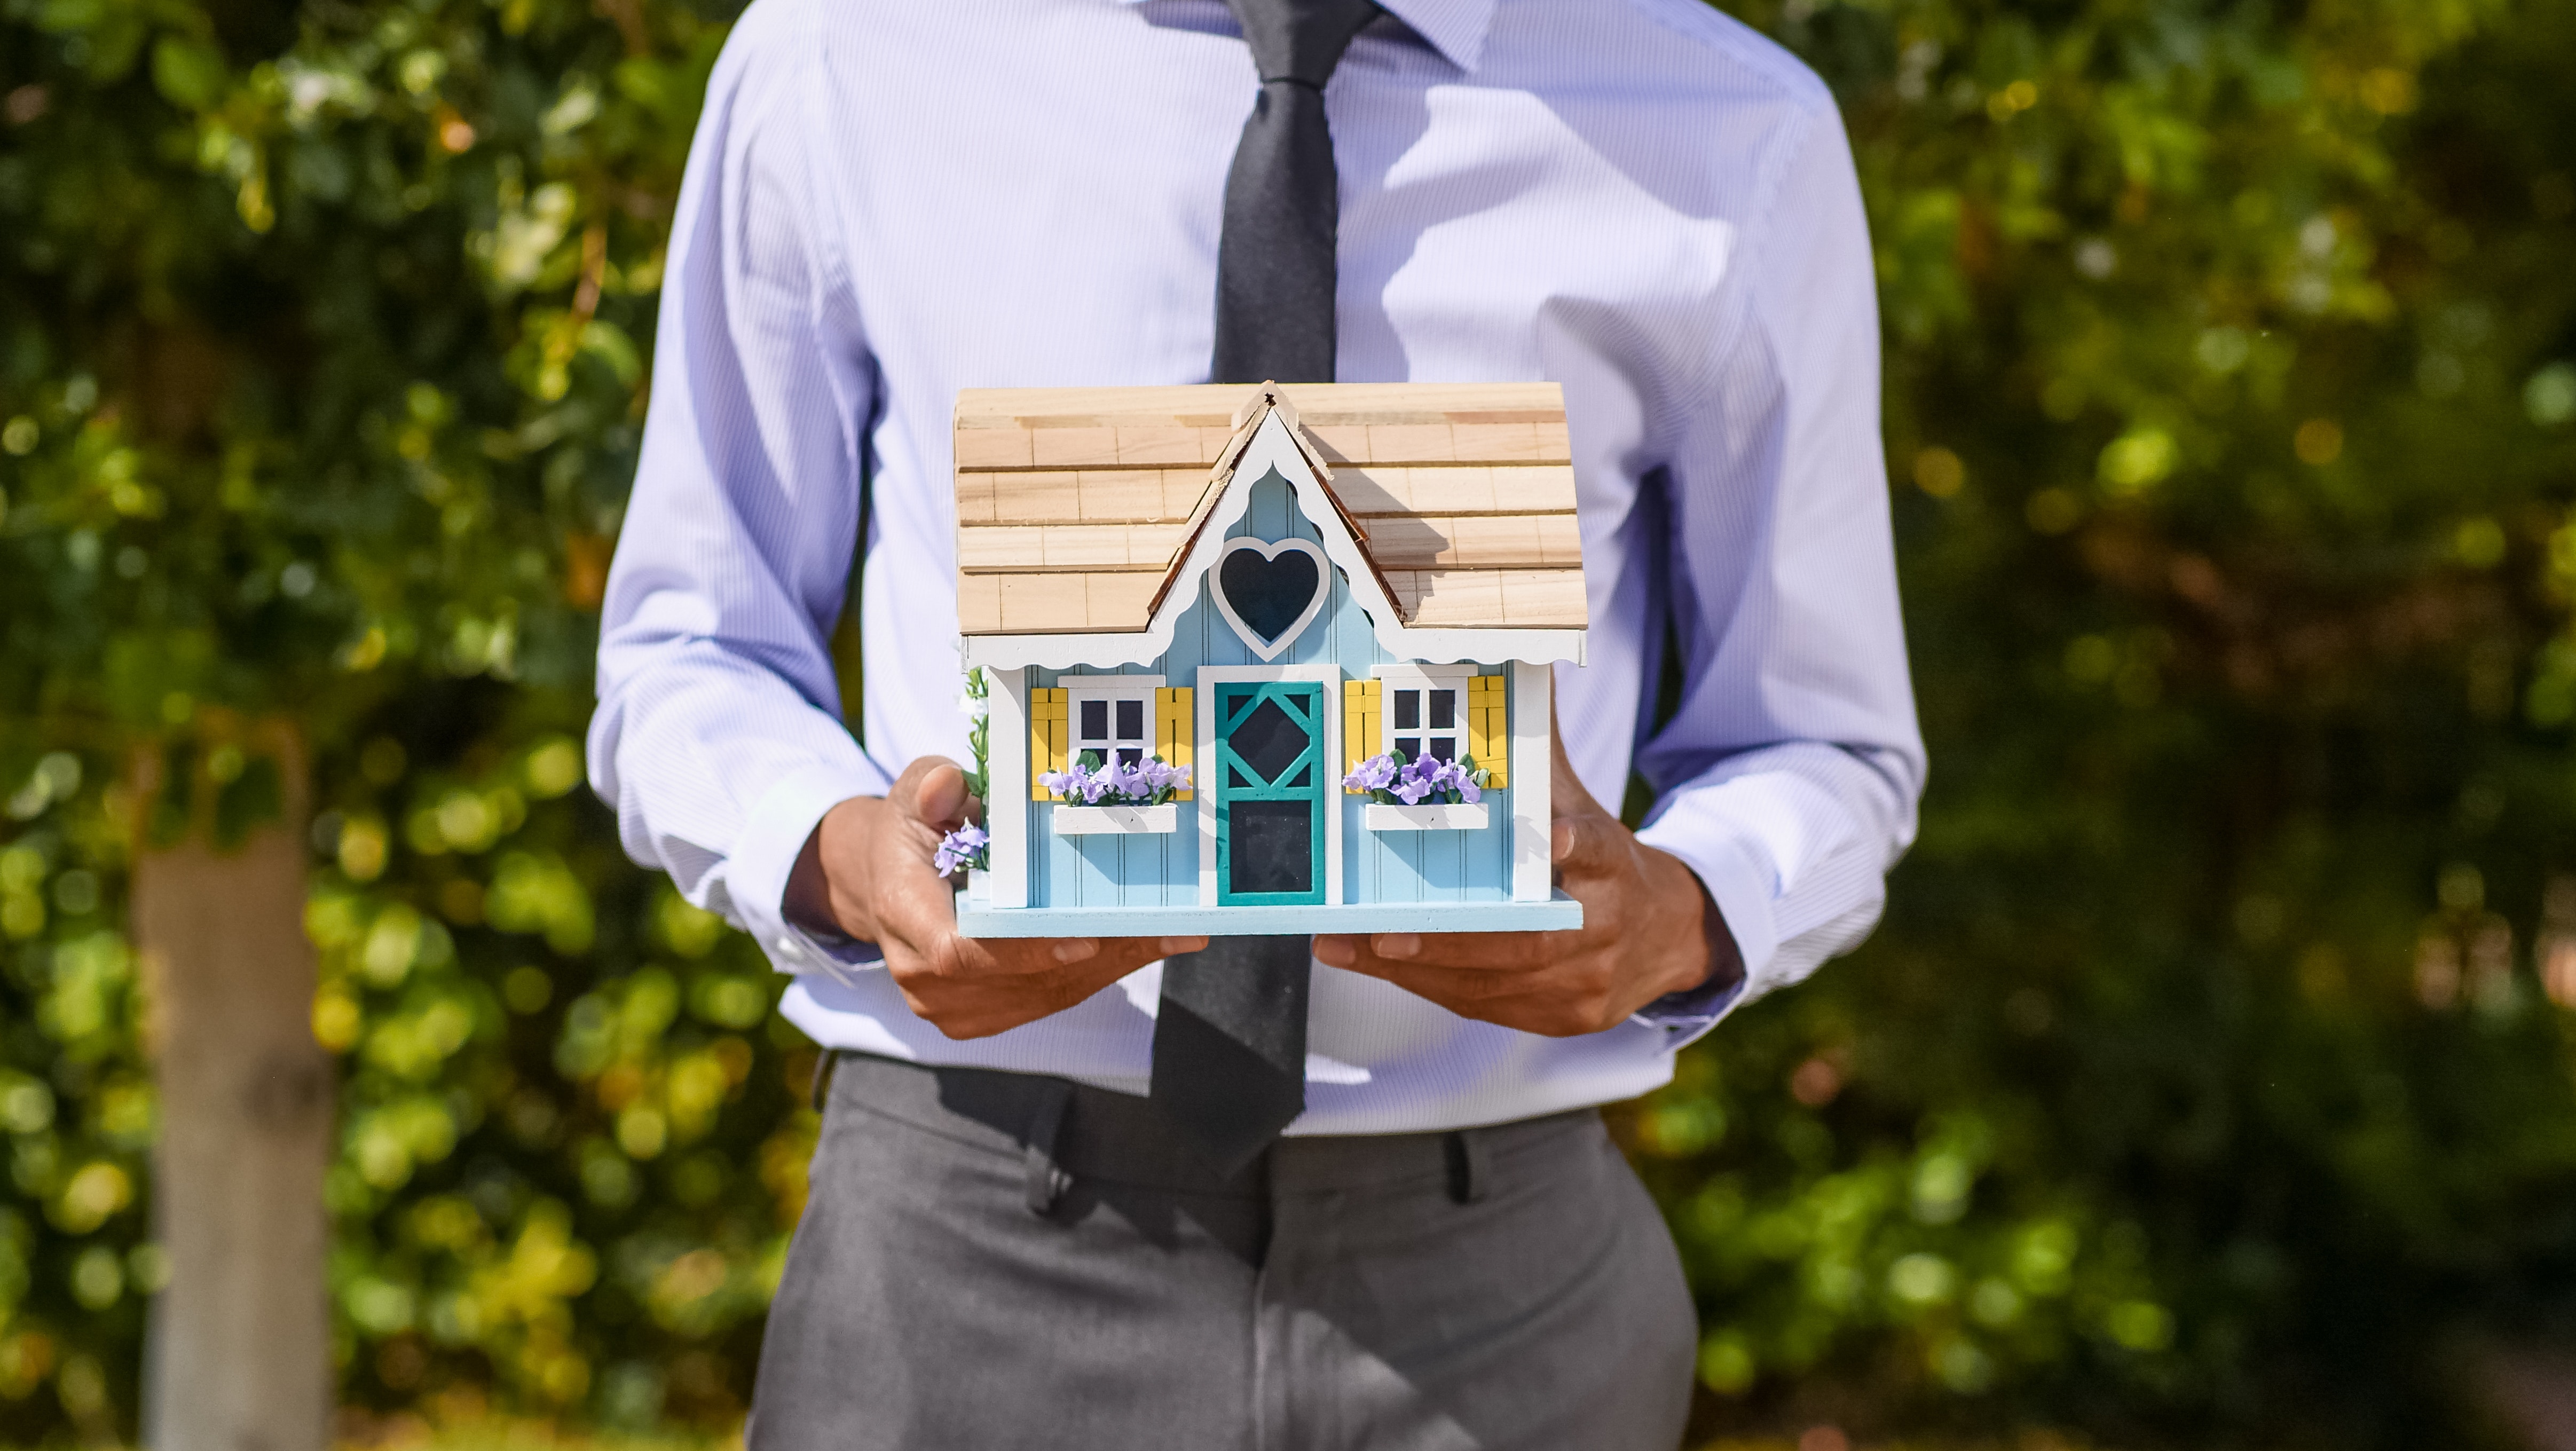 Can Hiring a Real Estate Agent Help You Maximize Your Home’s Value?